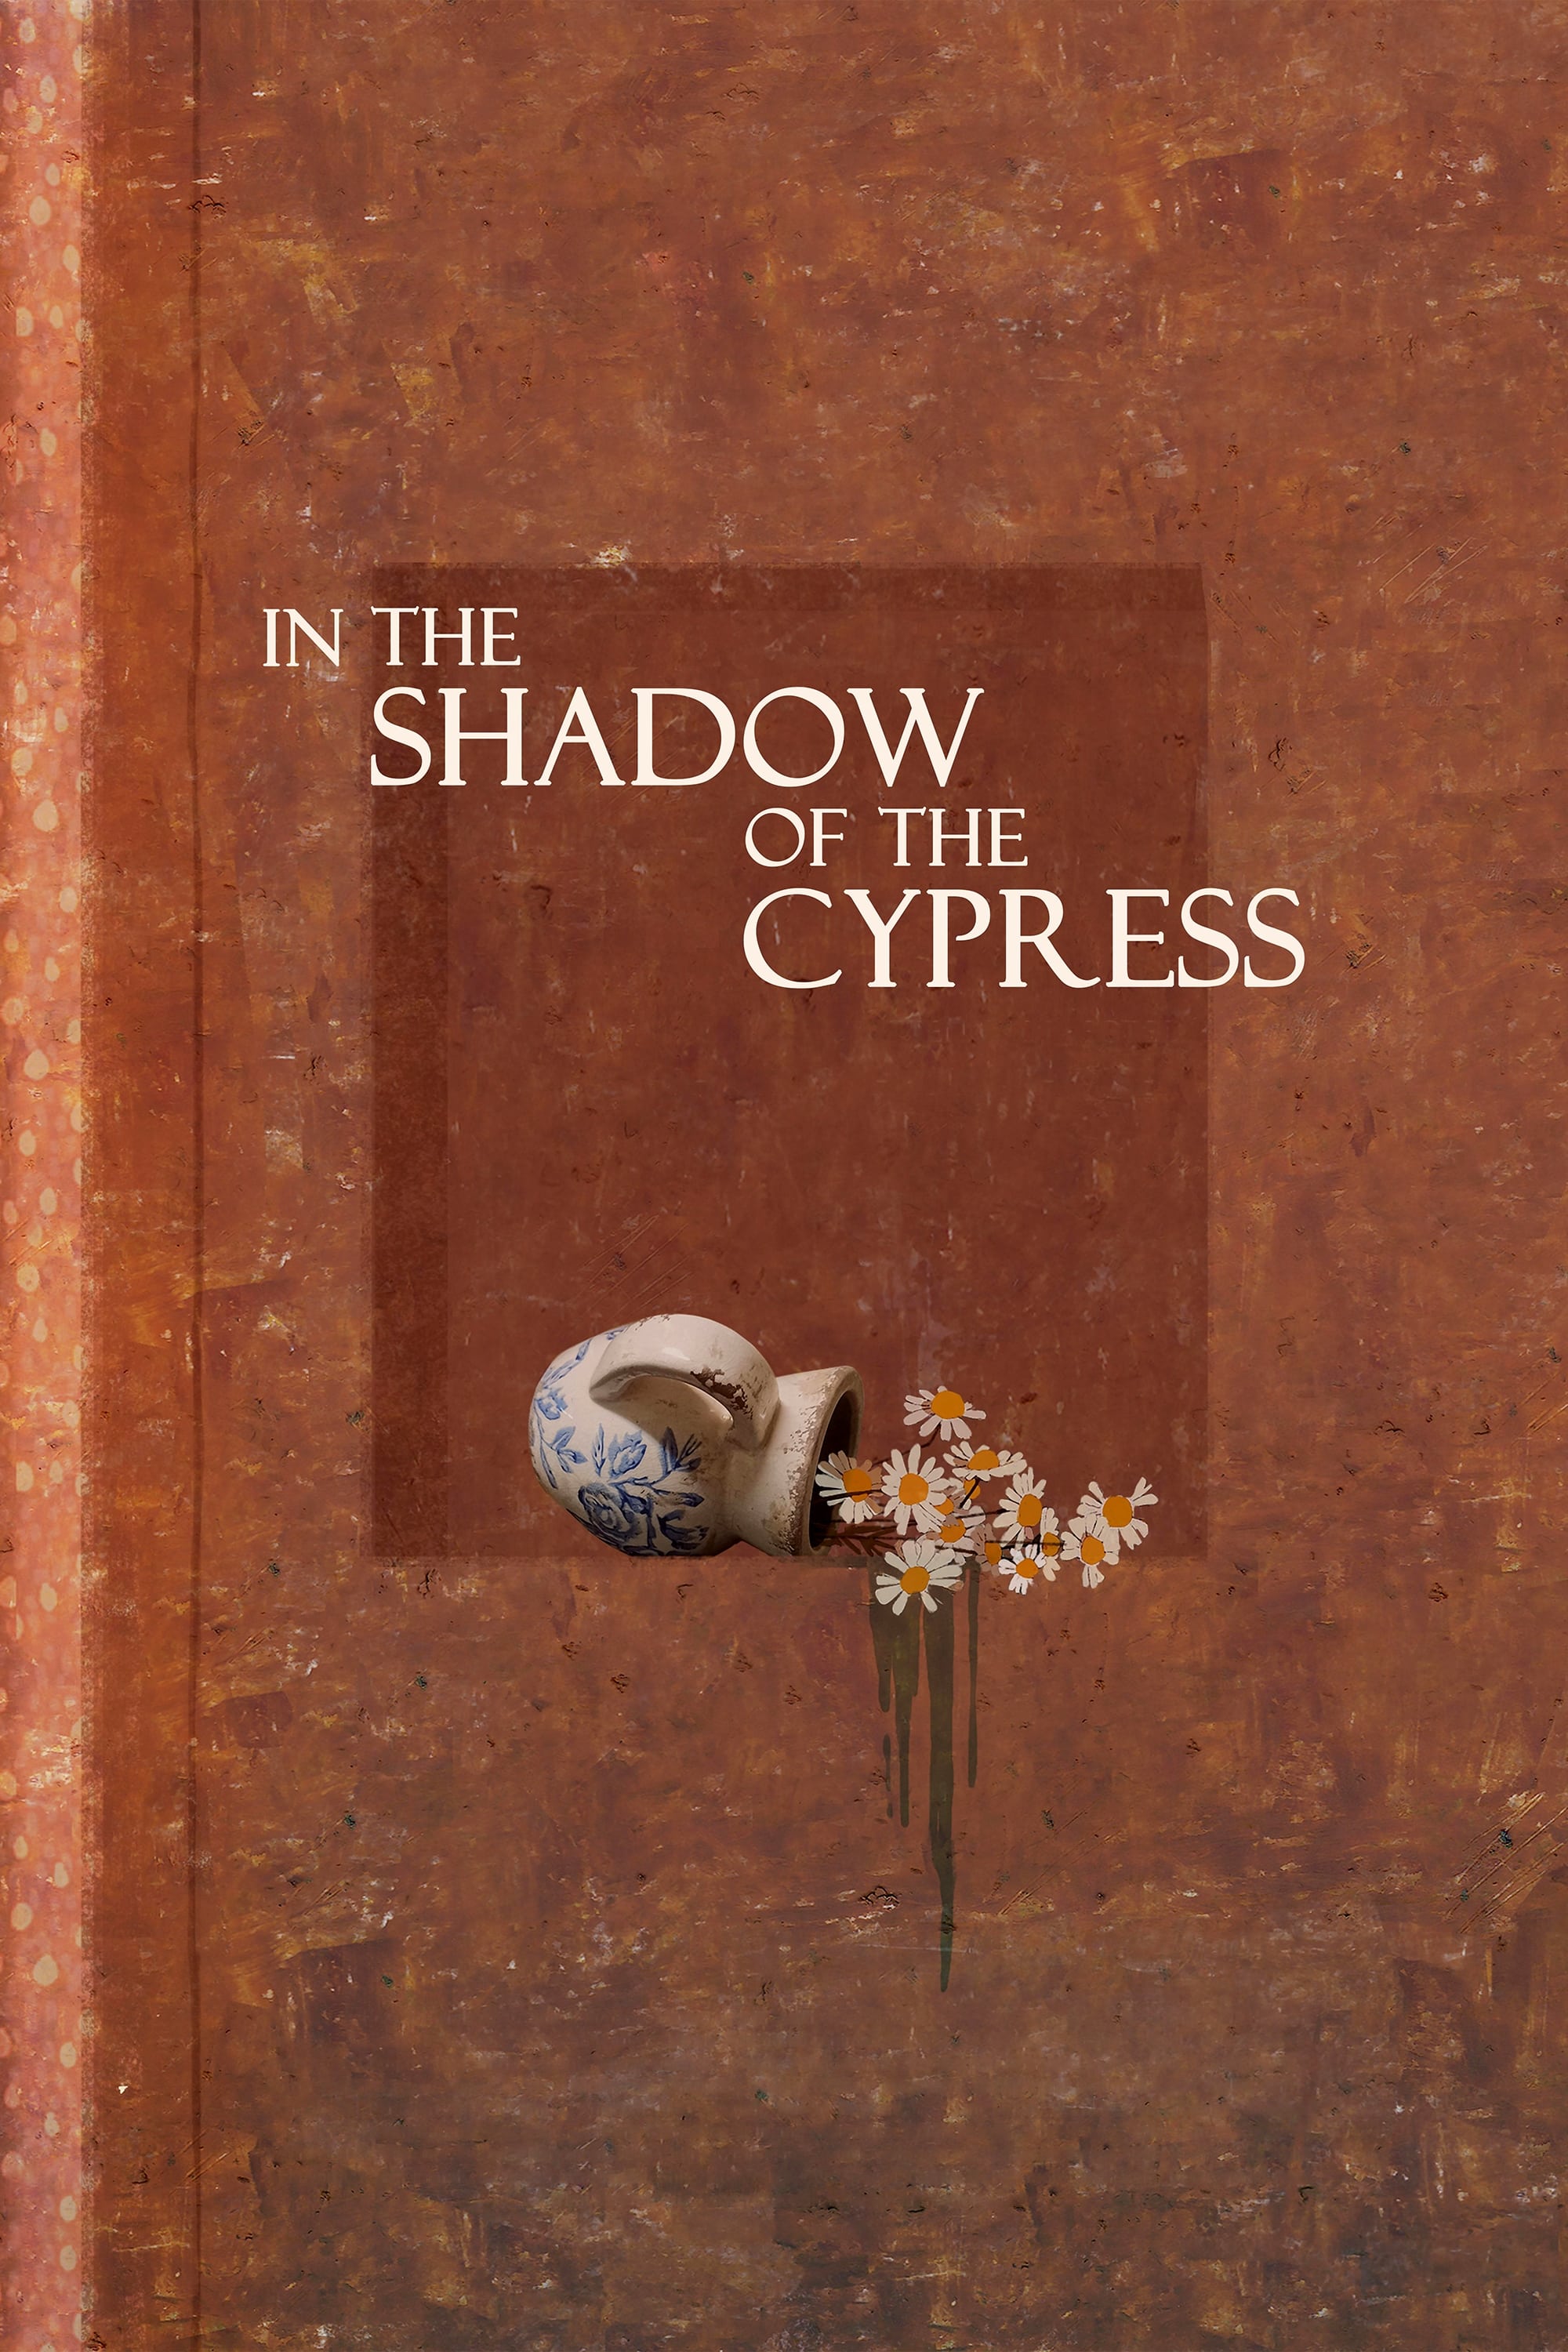 In the Shadow of the Cypress